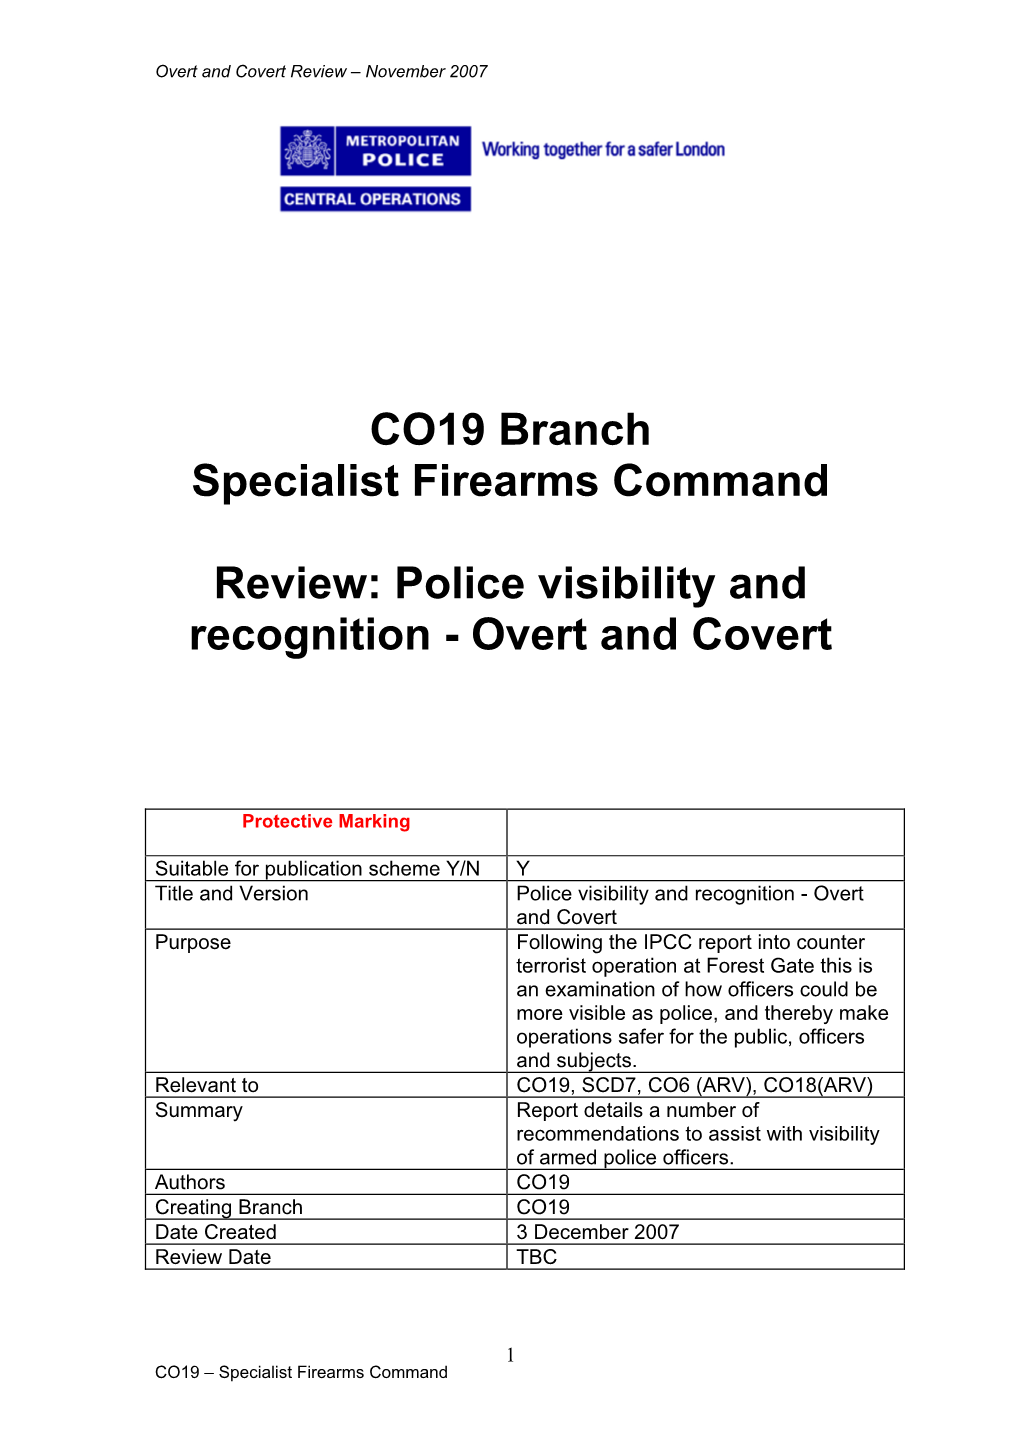 Police Visibility and Recognition - Overt and Covert